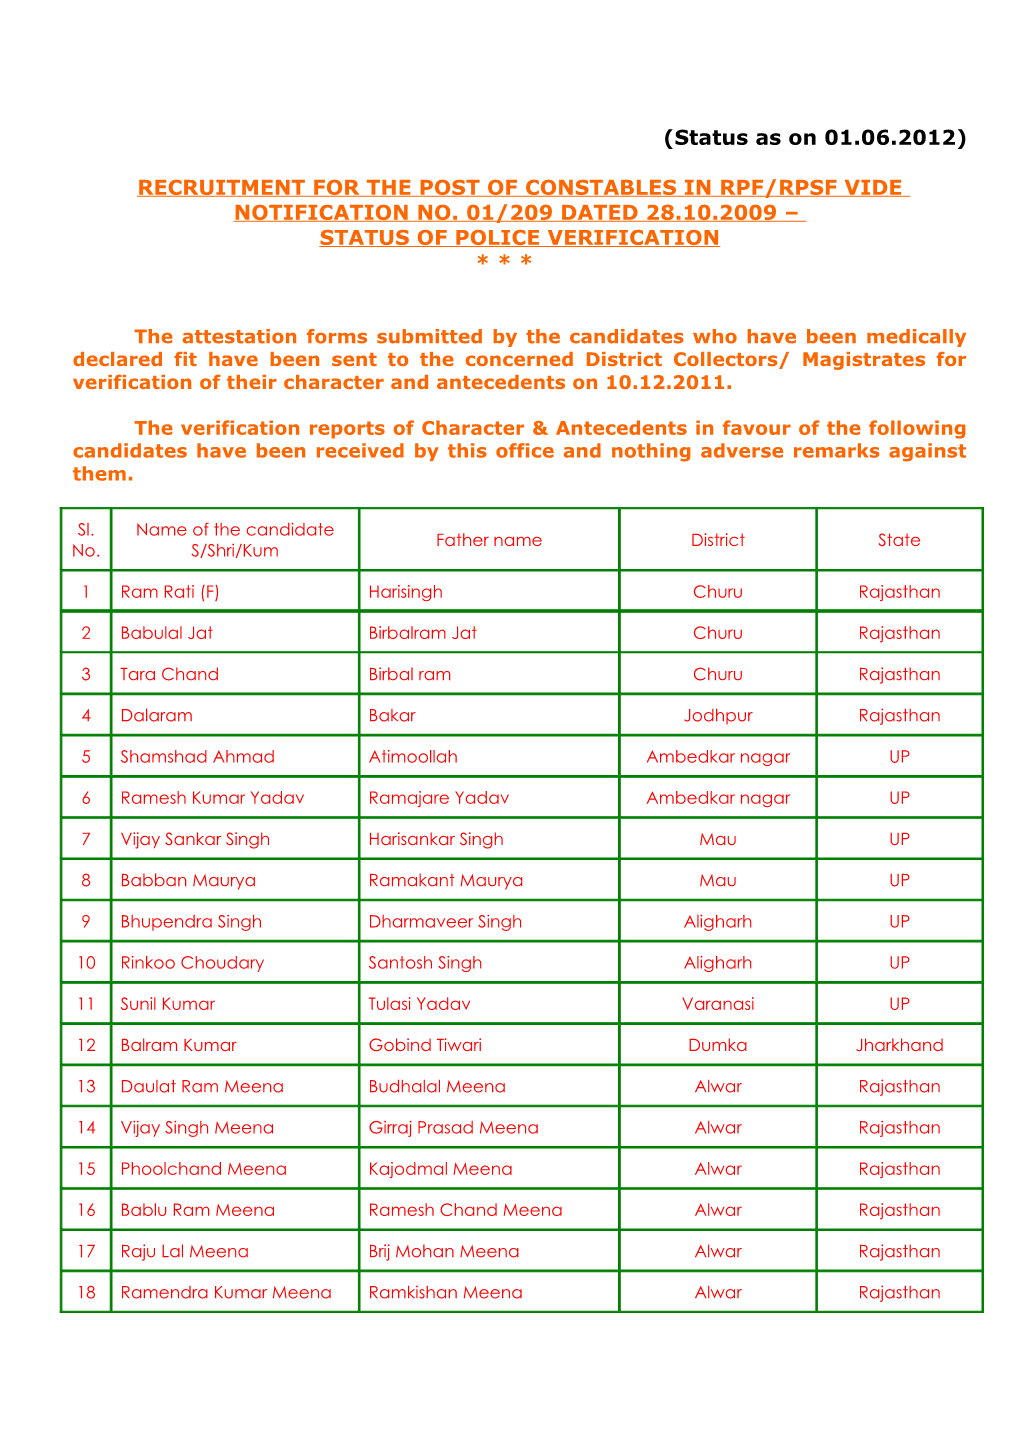 (Status As on 01.06.2012) RECRUITMENT for the POST of CONSTABLES in RPF/RPSF VIDE NOTIFICATION NO. 01/209 DATED 28.10.2009